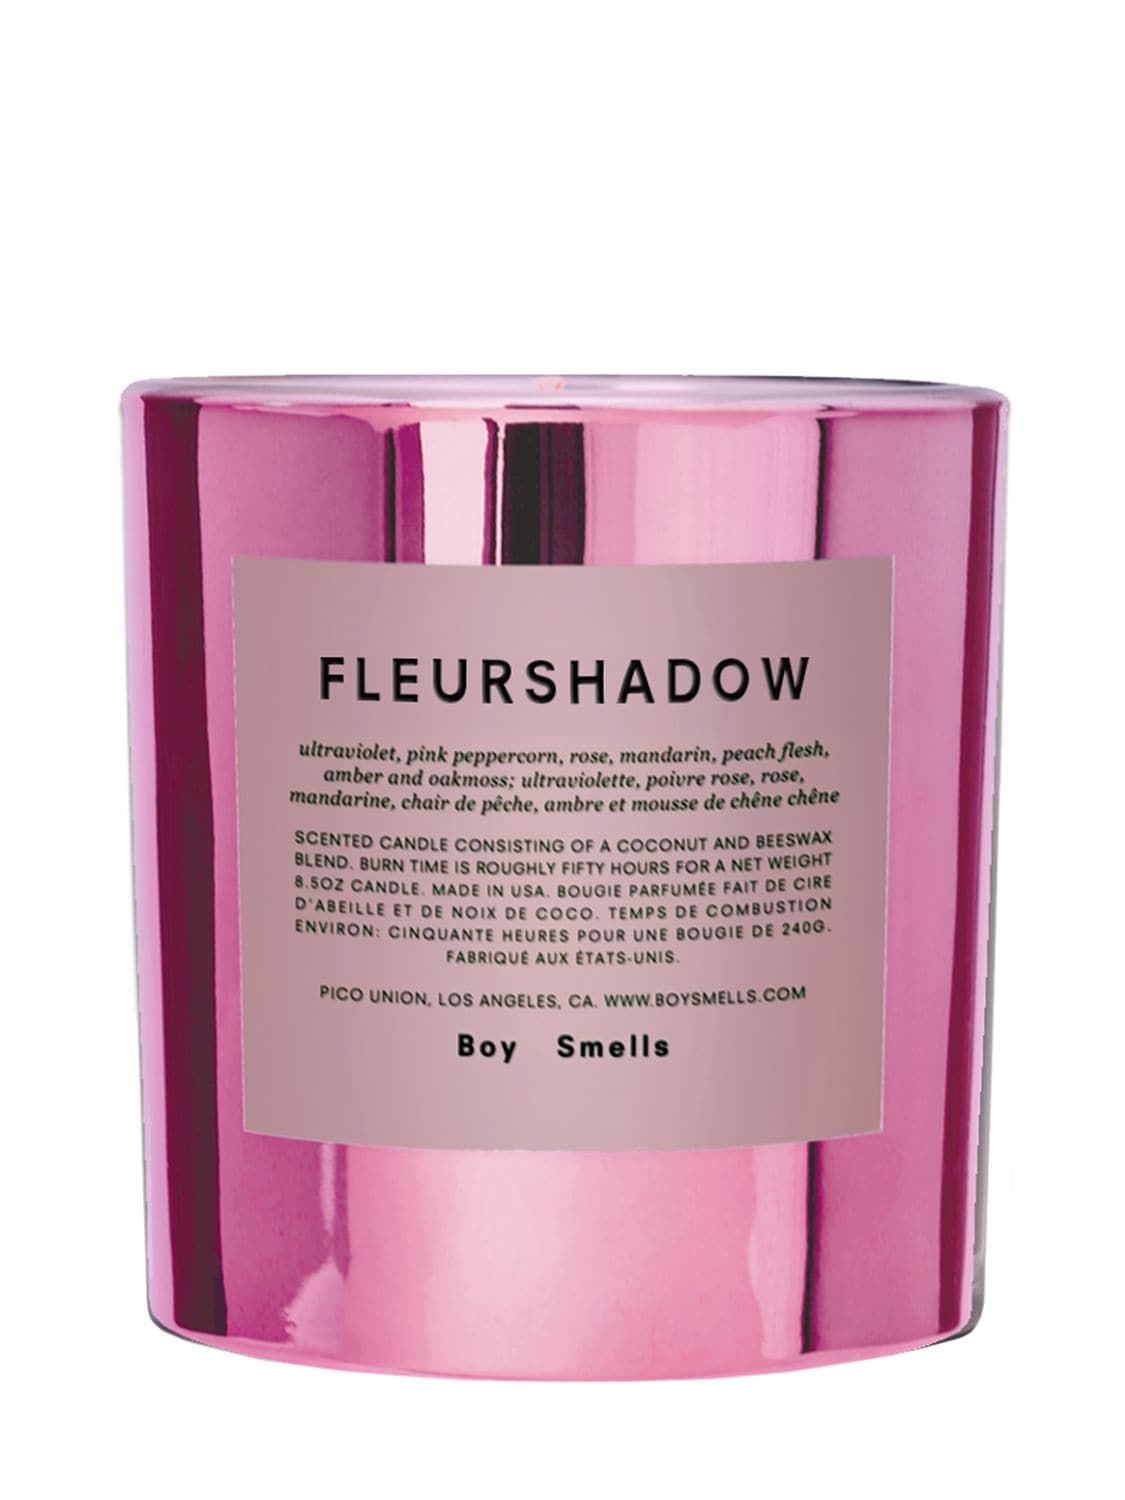 240g Fleurshadow Scented Candle – HOME > HOME DÉCOR > CANDLES & CANDLEHOLDERS